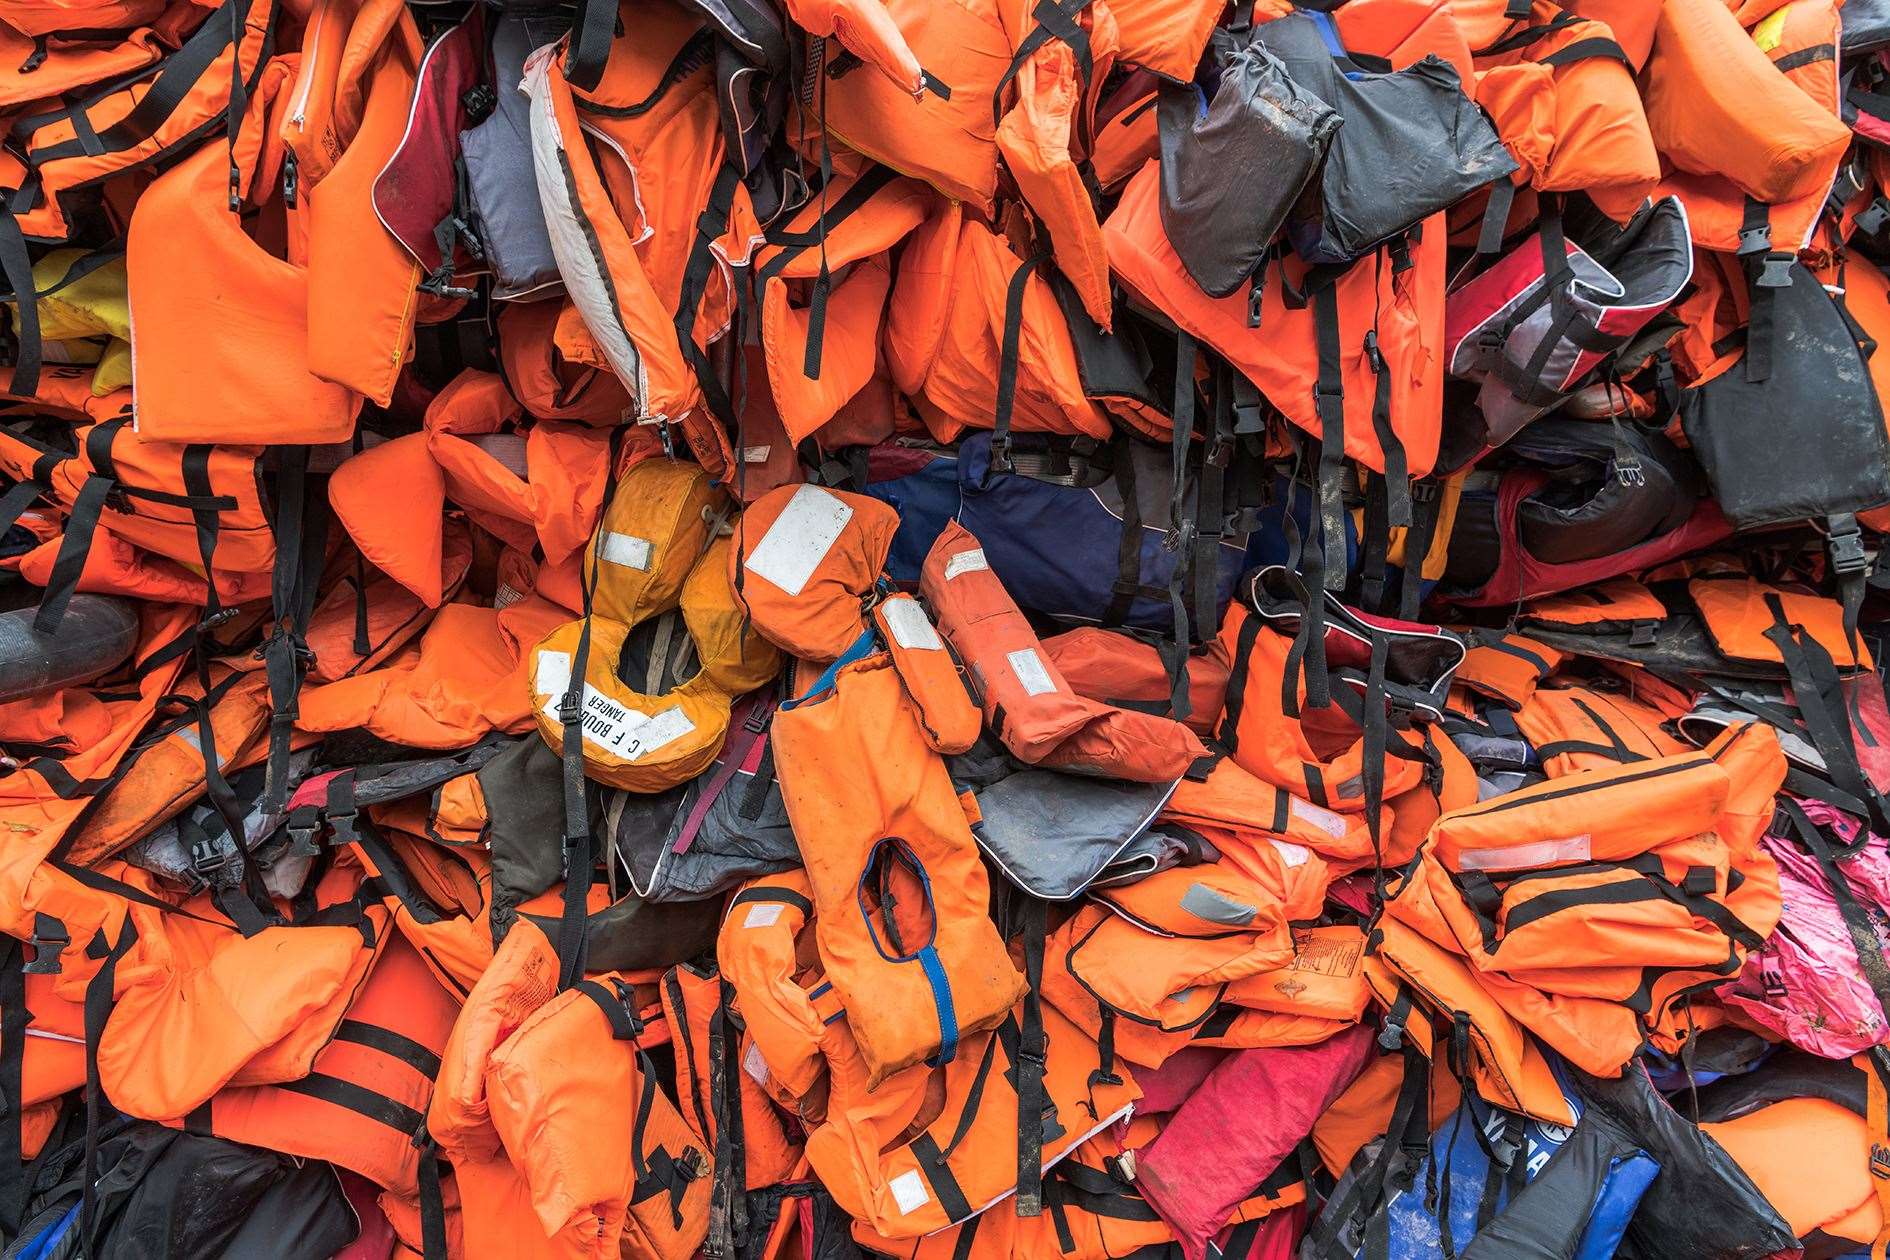 Pictures of piles of lifejackets helped to illustrate the scale of the problem.